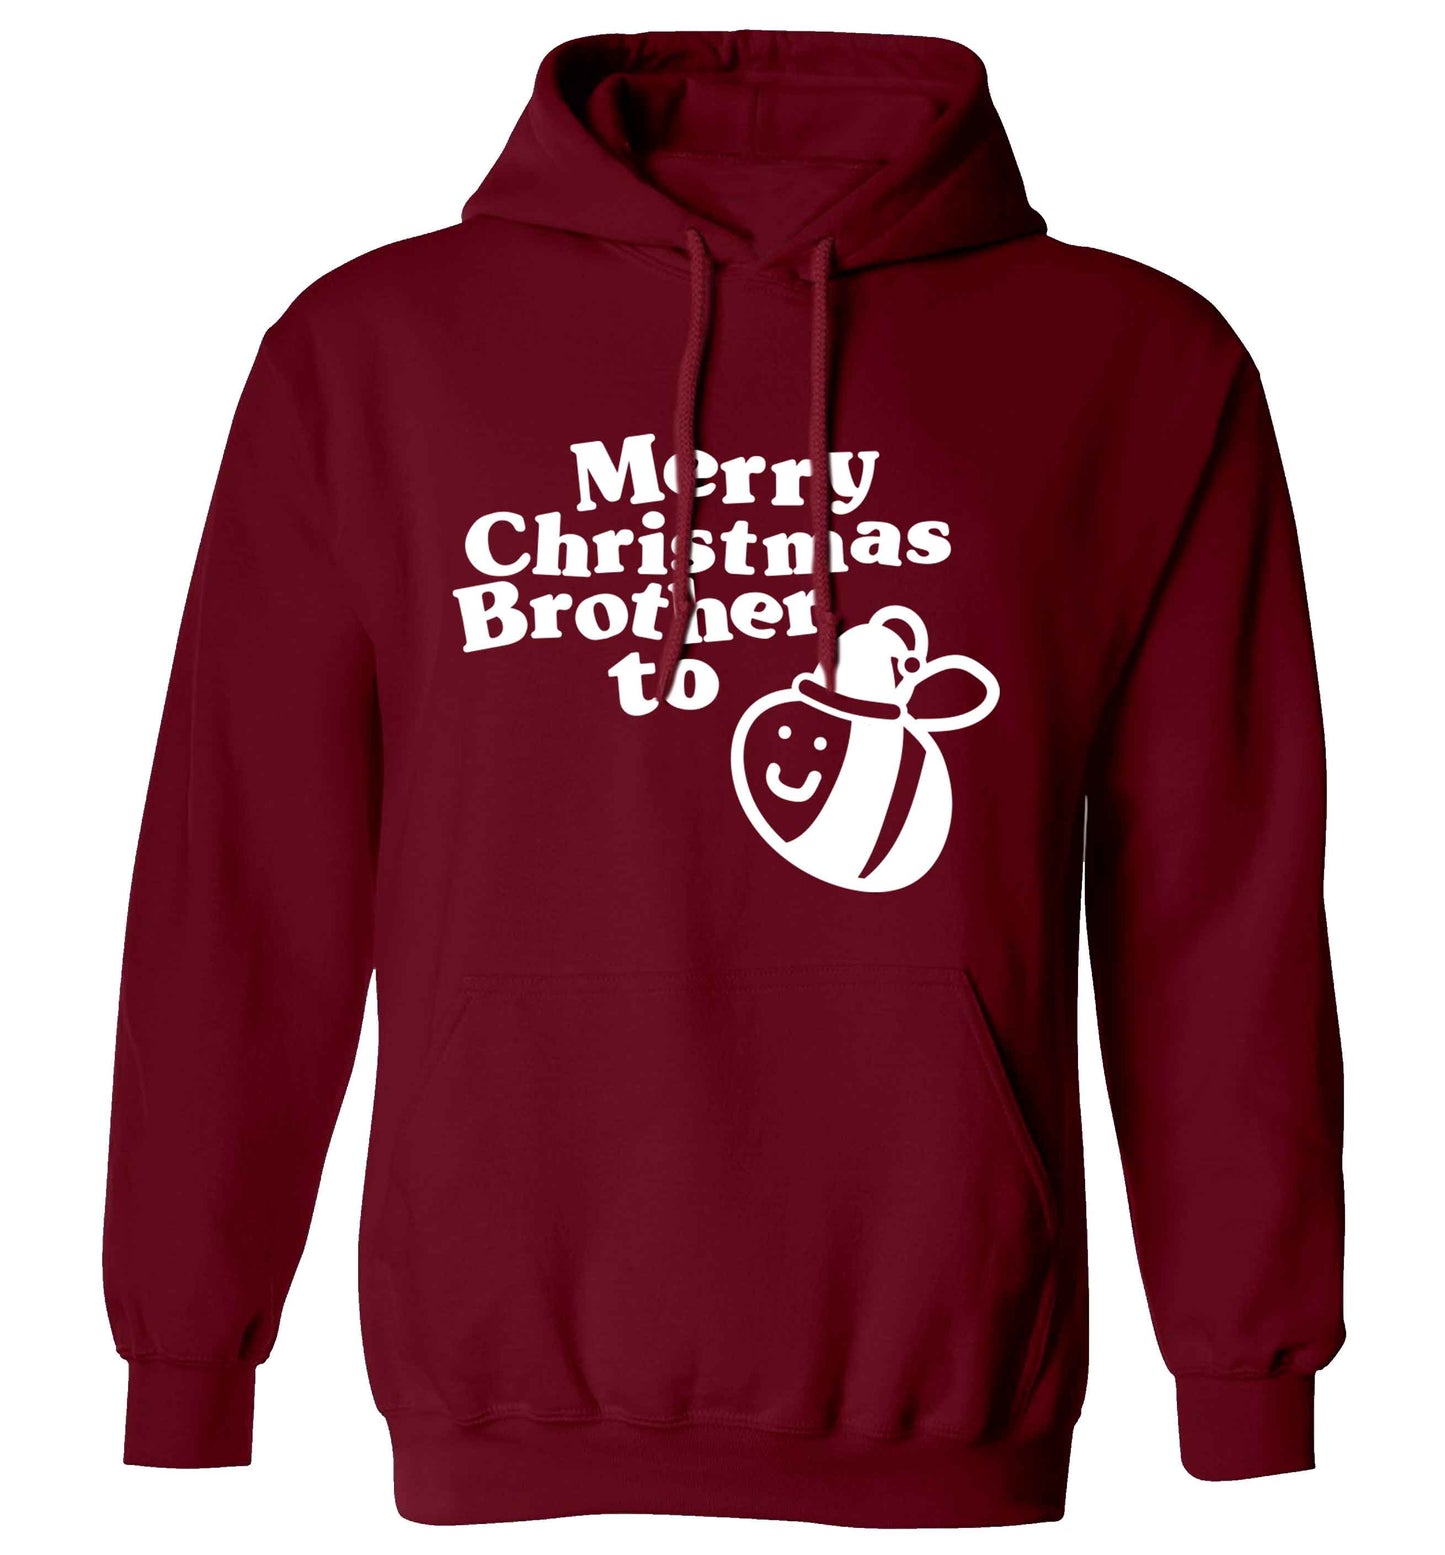 Merry Christmas brother to be adults unisex maroon hoodie 2XL